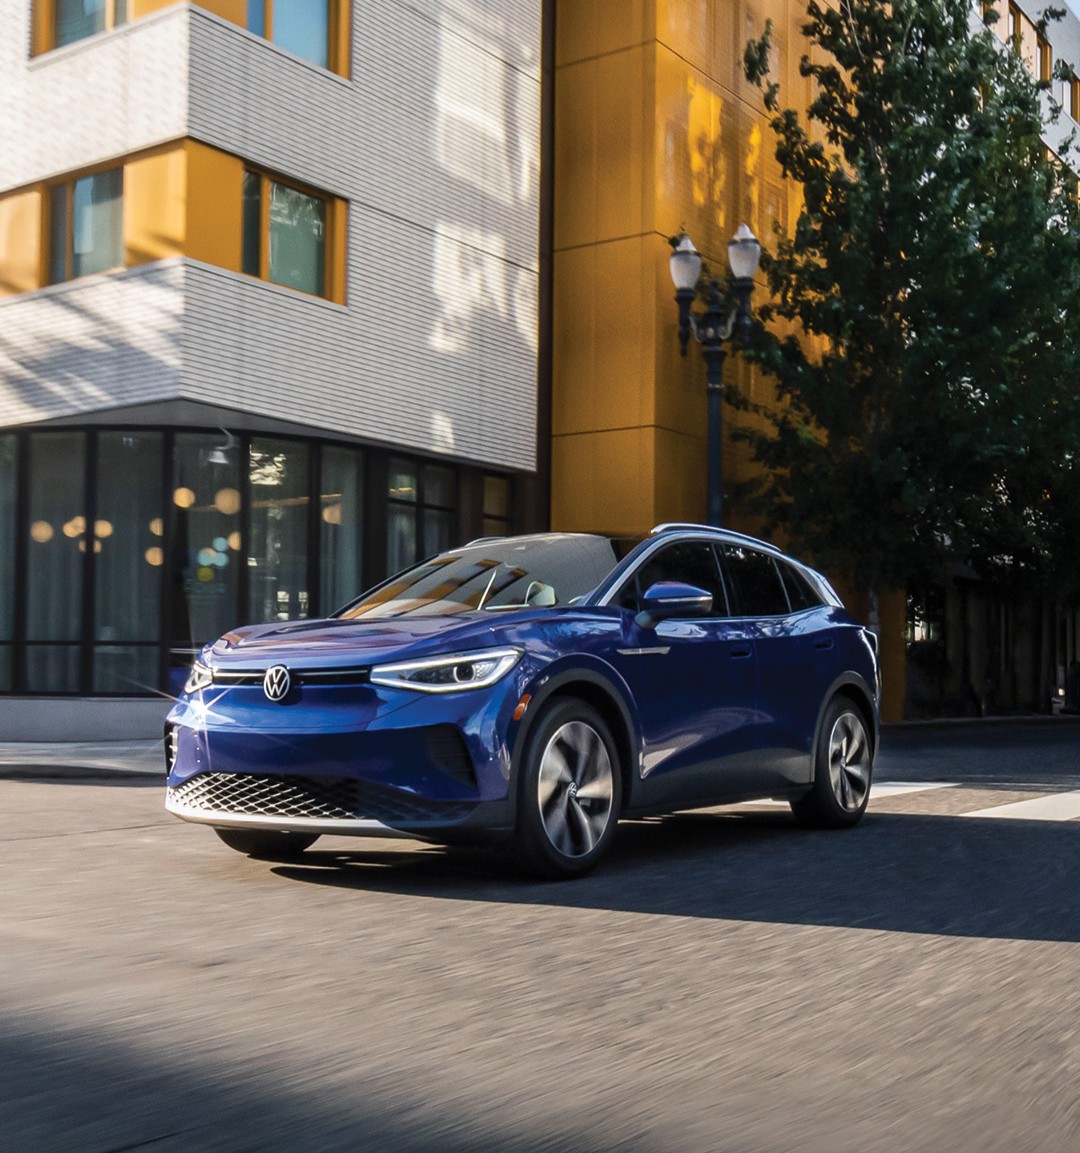 ⚡️Dive into the future of driving with the all-electric ID.4 Volkswagen - zero emissions, endless adventures. 🌿
🔗 bit.ly/3S3G2V4
.
.
.
#VolkswagenOfSmithtown #VW #VolkswagenVehicles #NewVolkswagen #ID4 #Automotive #Auto #ID4Volkswagen #Savings #Deals #Specials